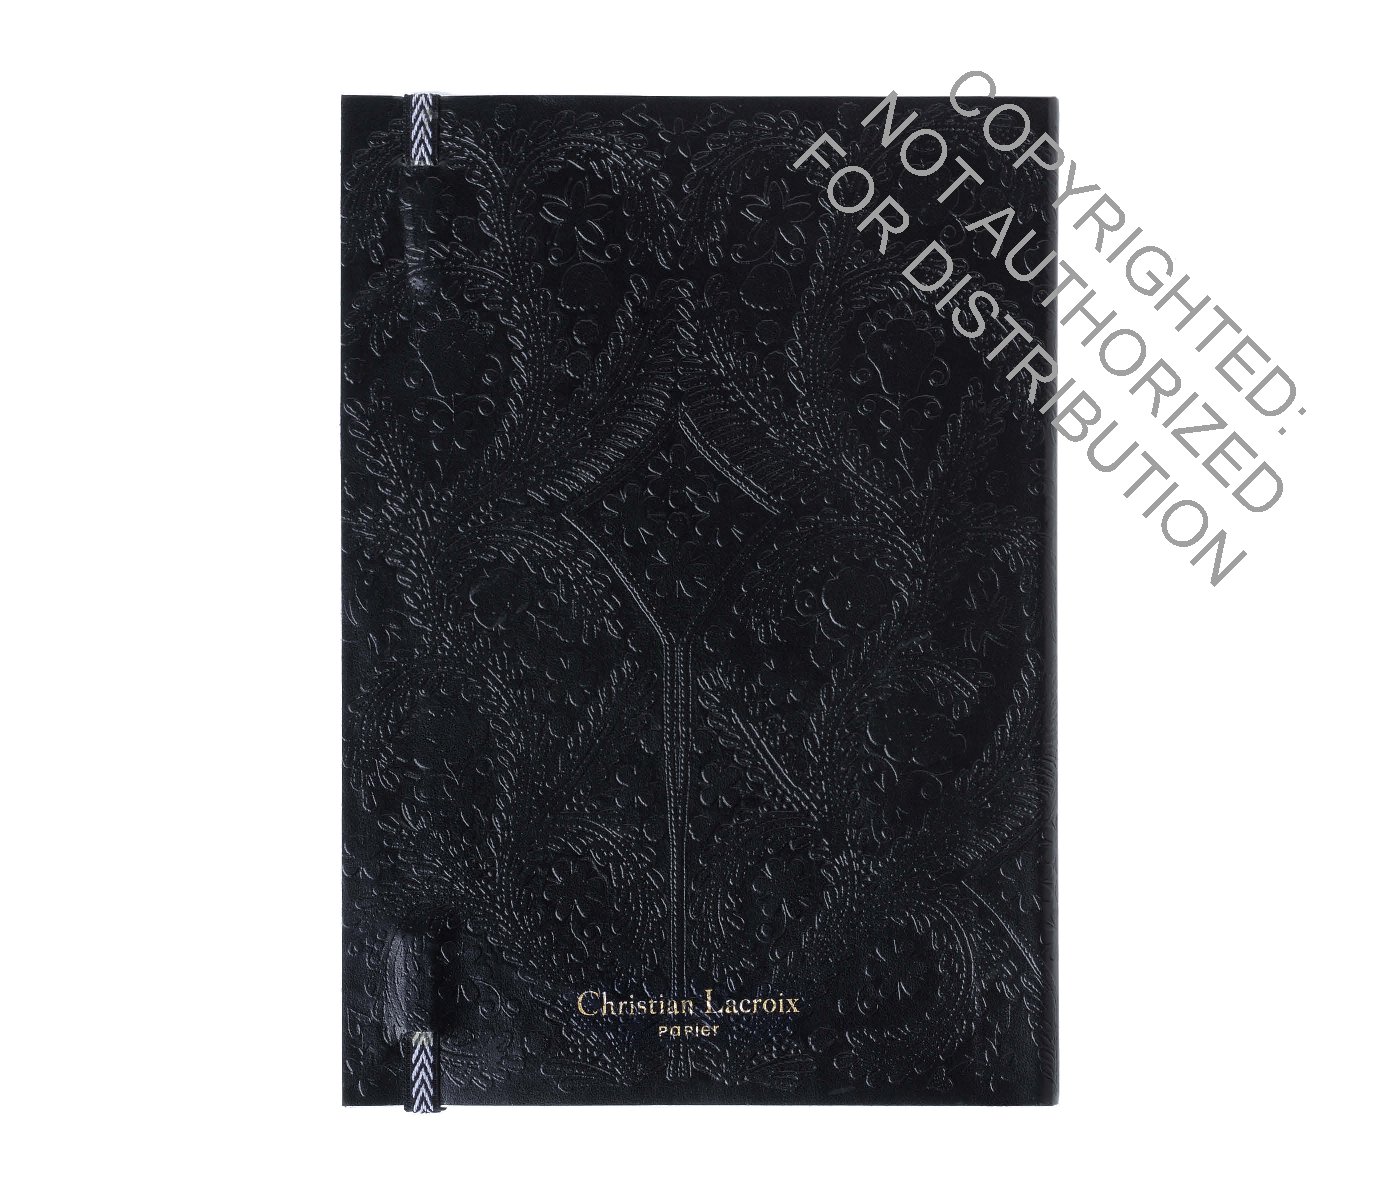 Christian Lacroix A6 Journal, Black Paseo Pattern - 4.25" x 6" - Layflat Writing Journal with 152 Ruled Ivory Pages